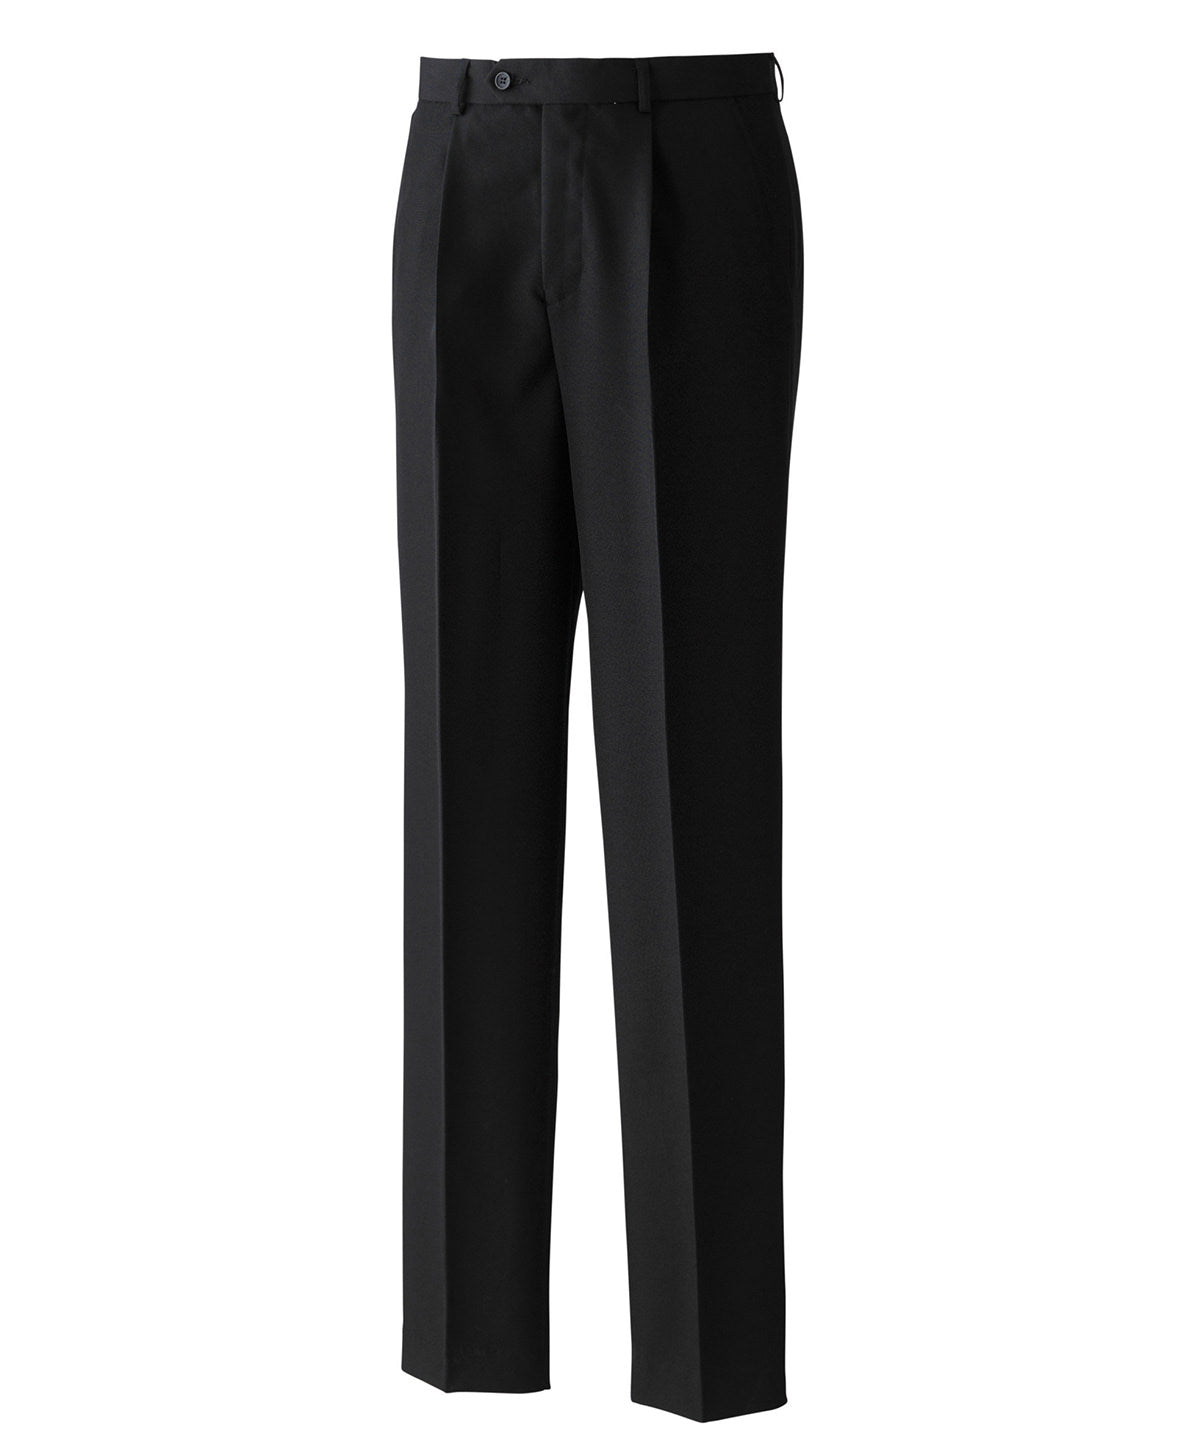 Premier Polyester trousers